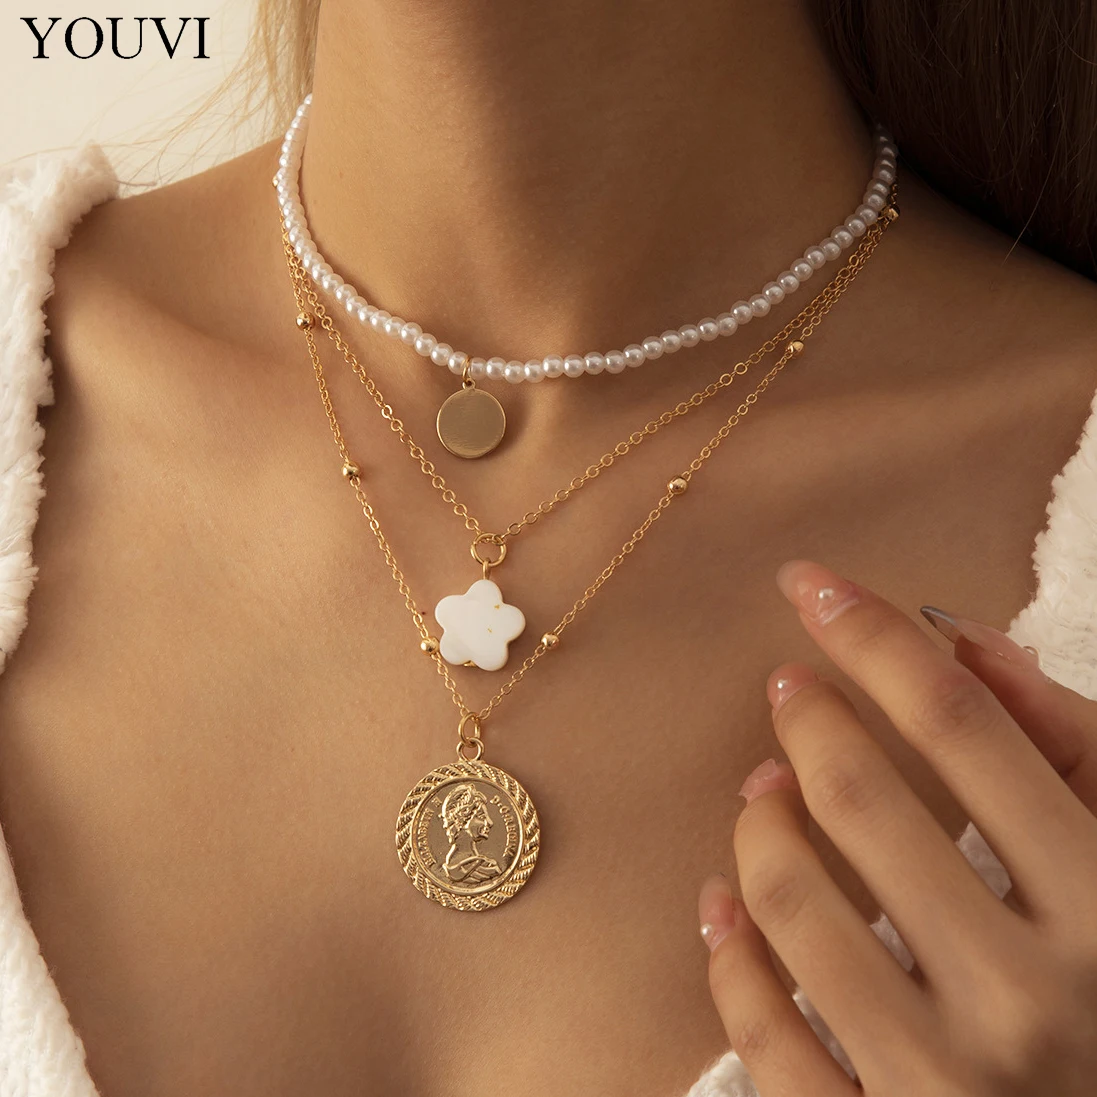 

YOUVI Vintage Simulated Pearl Necklace for Women Bohemian Multilayered Portrait Coin Shell Pendant Necklaces Collar Jewelry